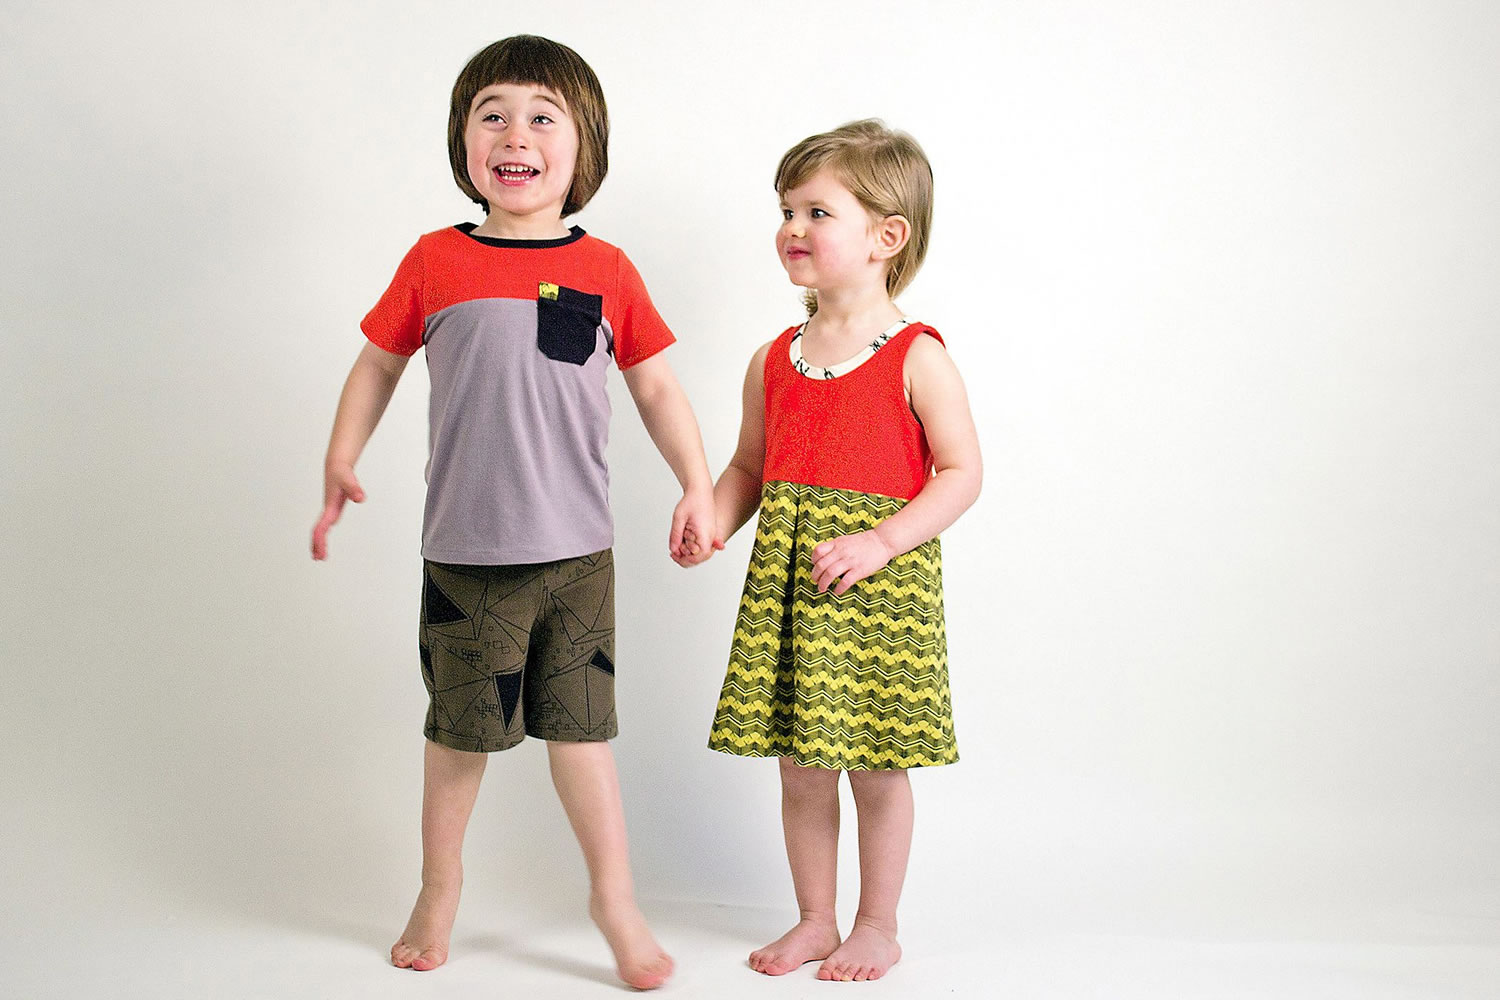 Hide and seek pocket T-shirt and double dutch dress by Kelly Lane Kids.